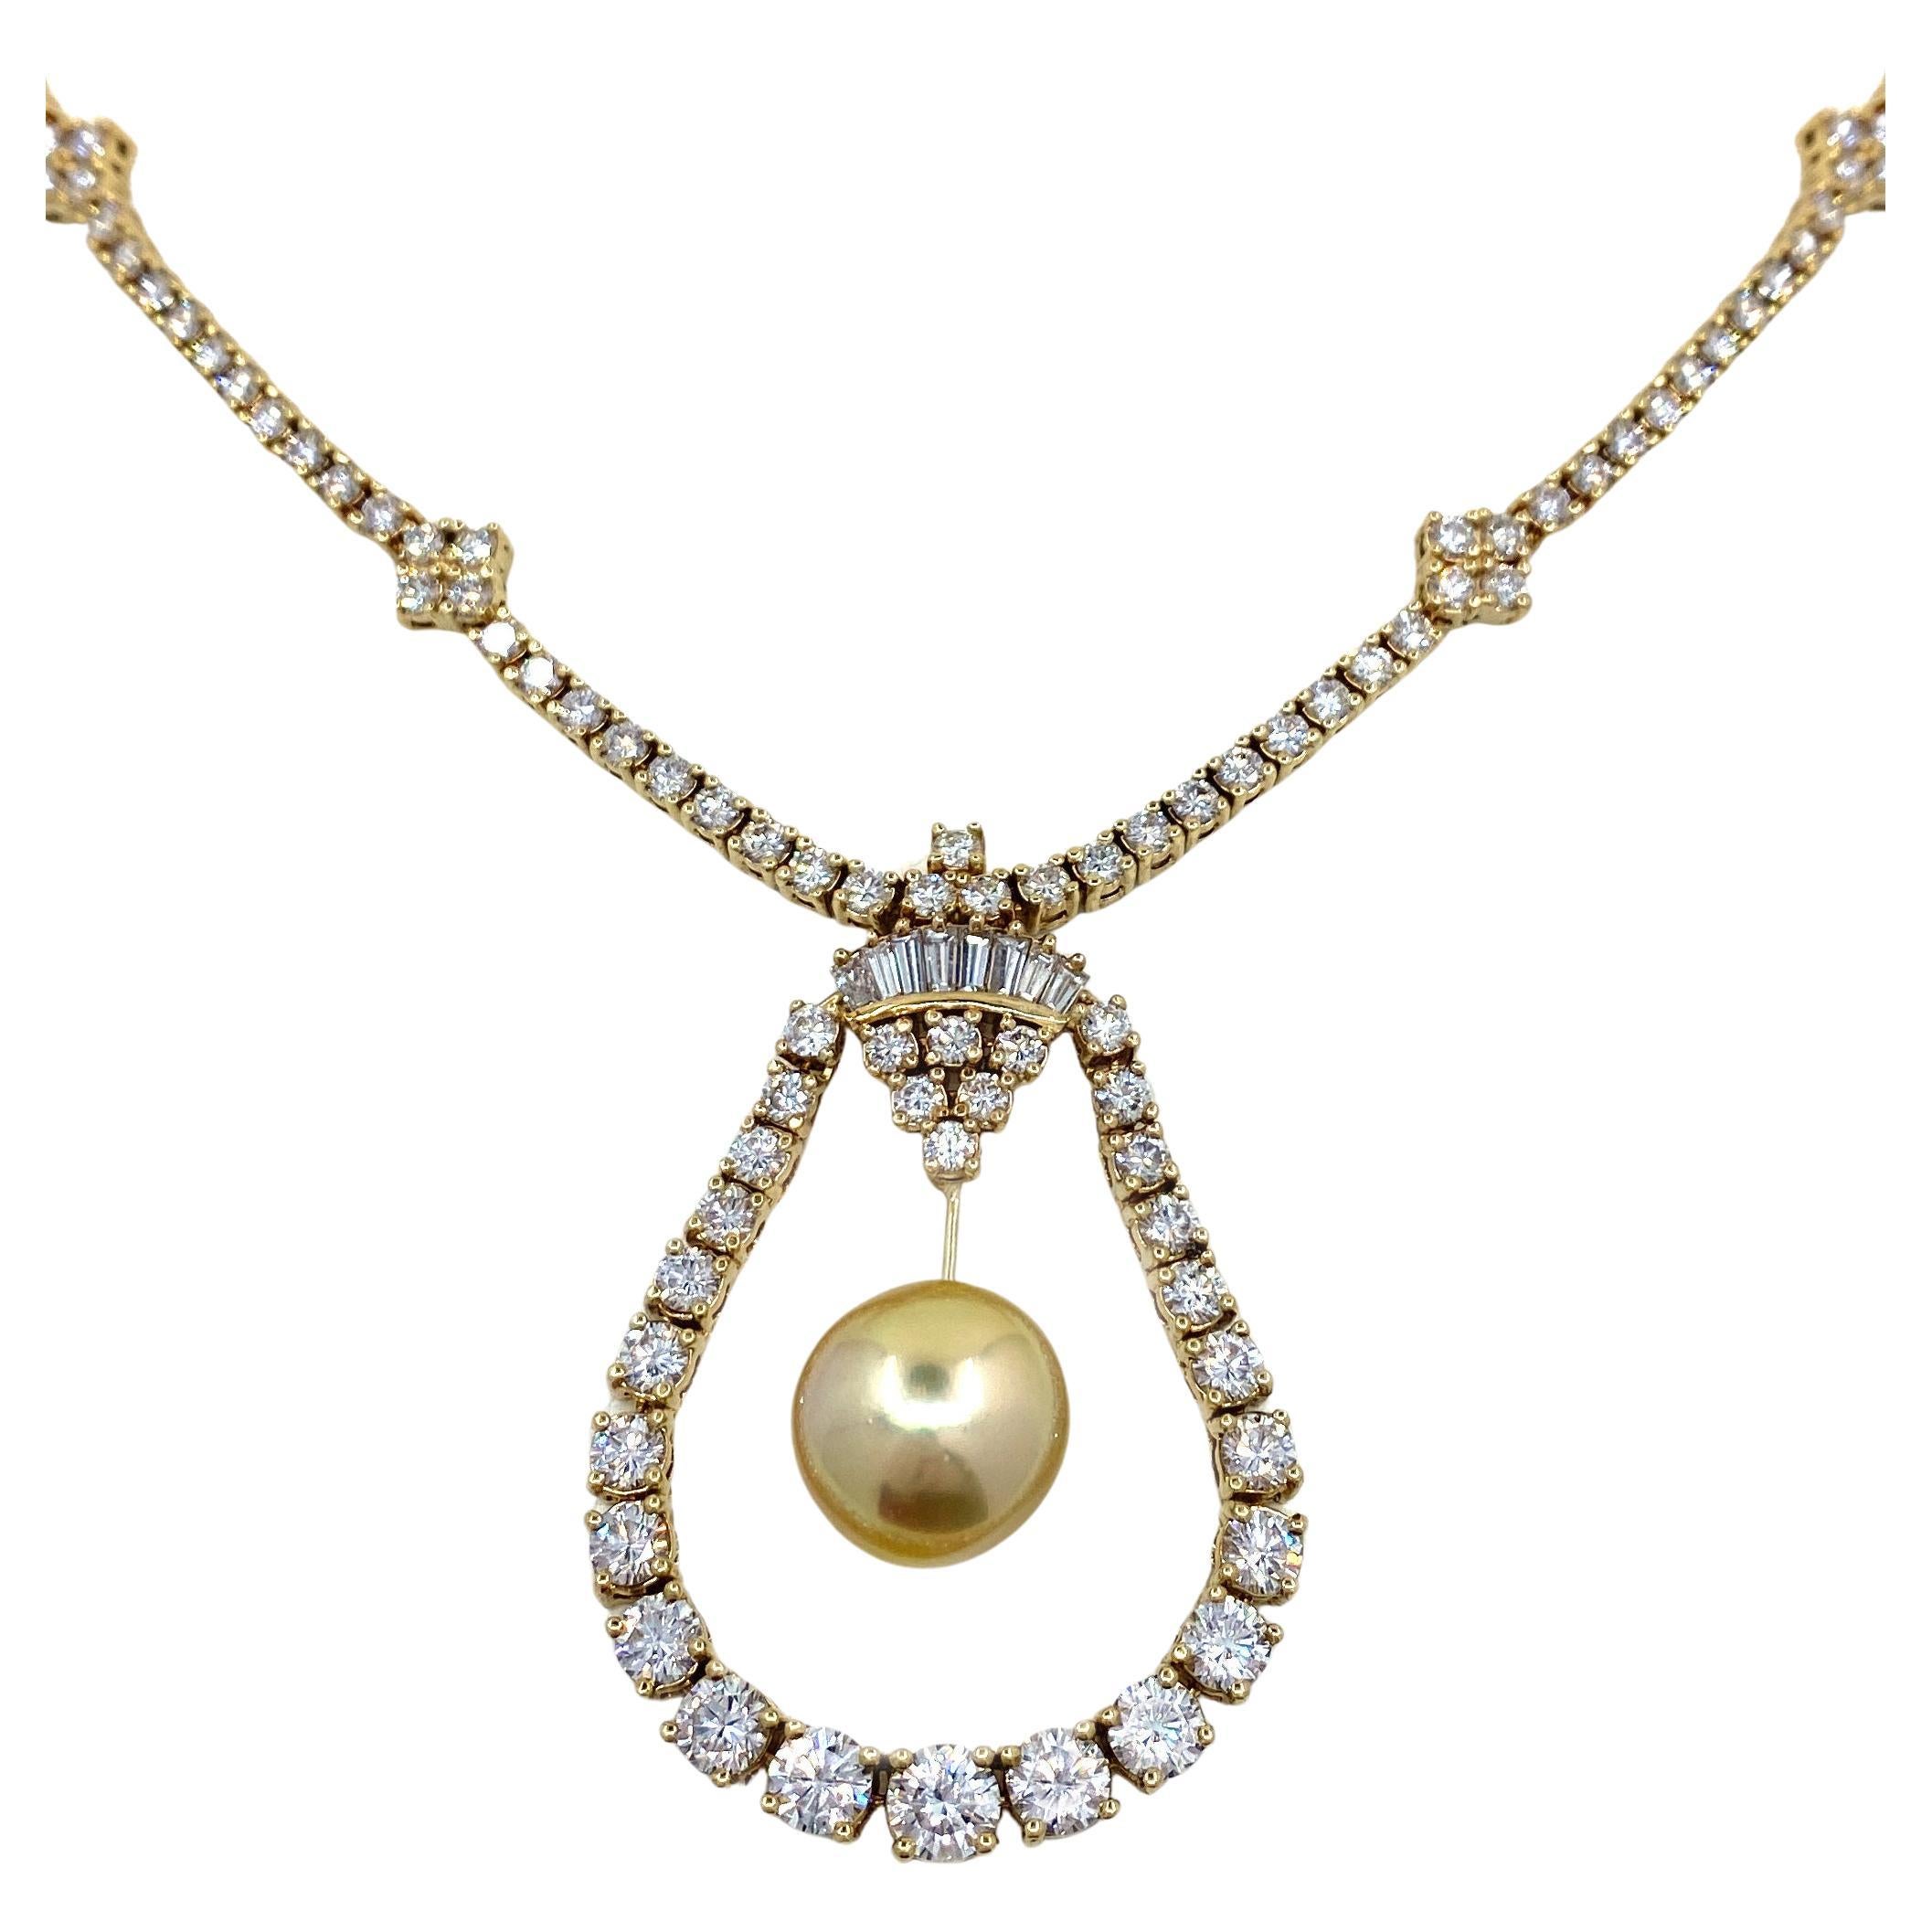 11 Carat Diamond Line Omega Necklace in Yellow Gold with Golden South Sea Pearl For Sale